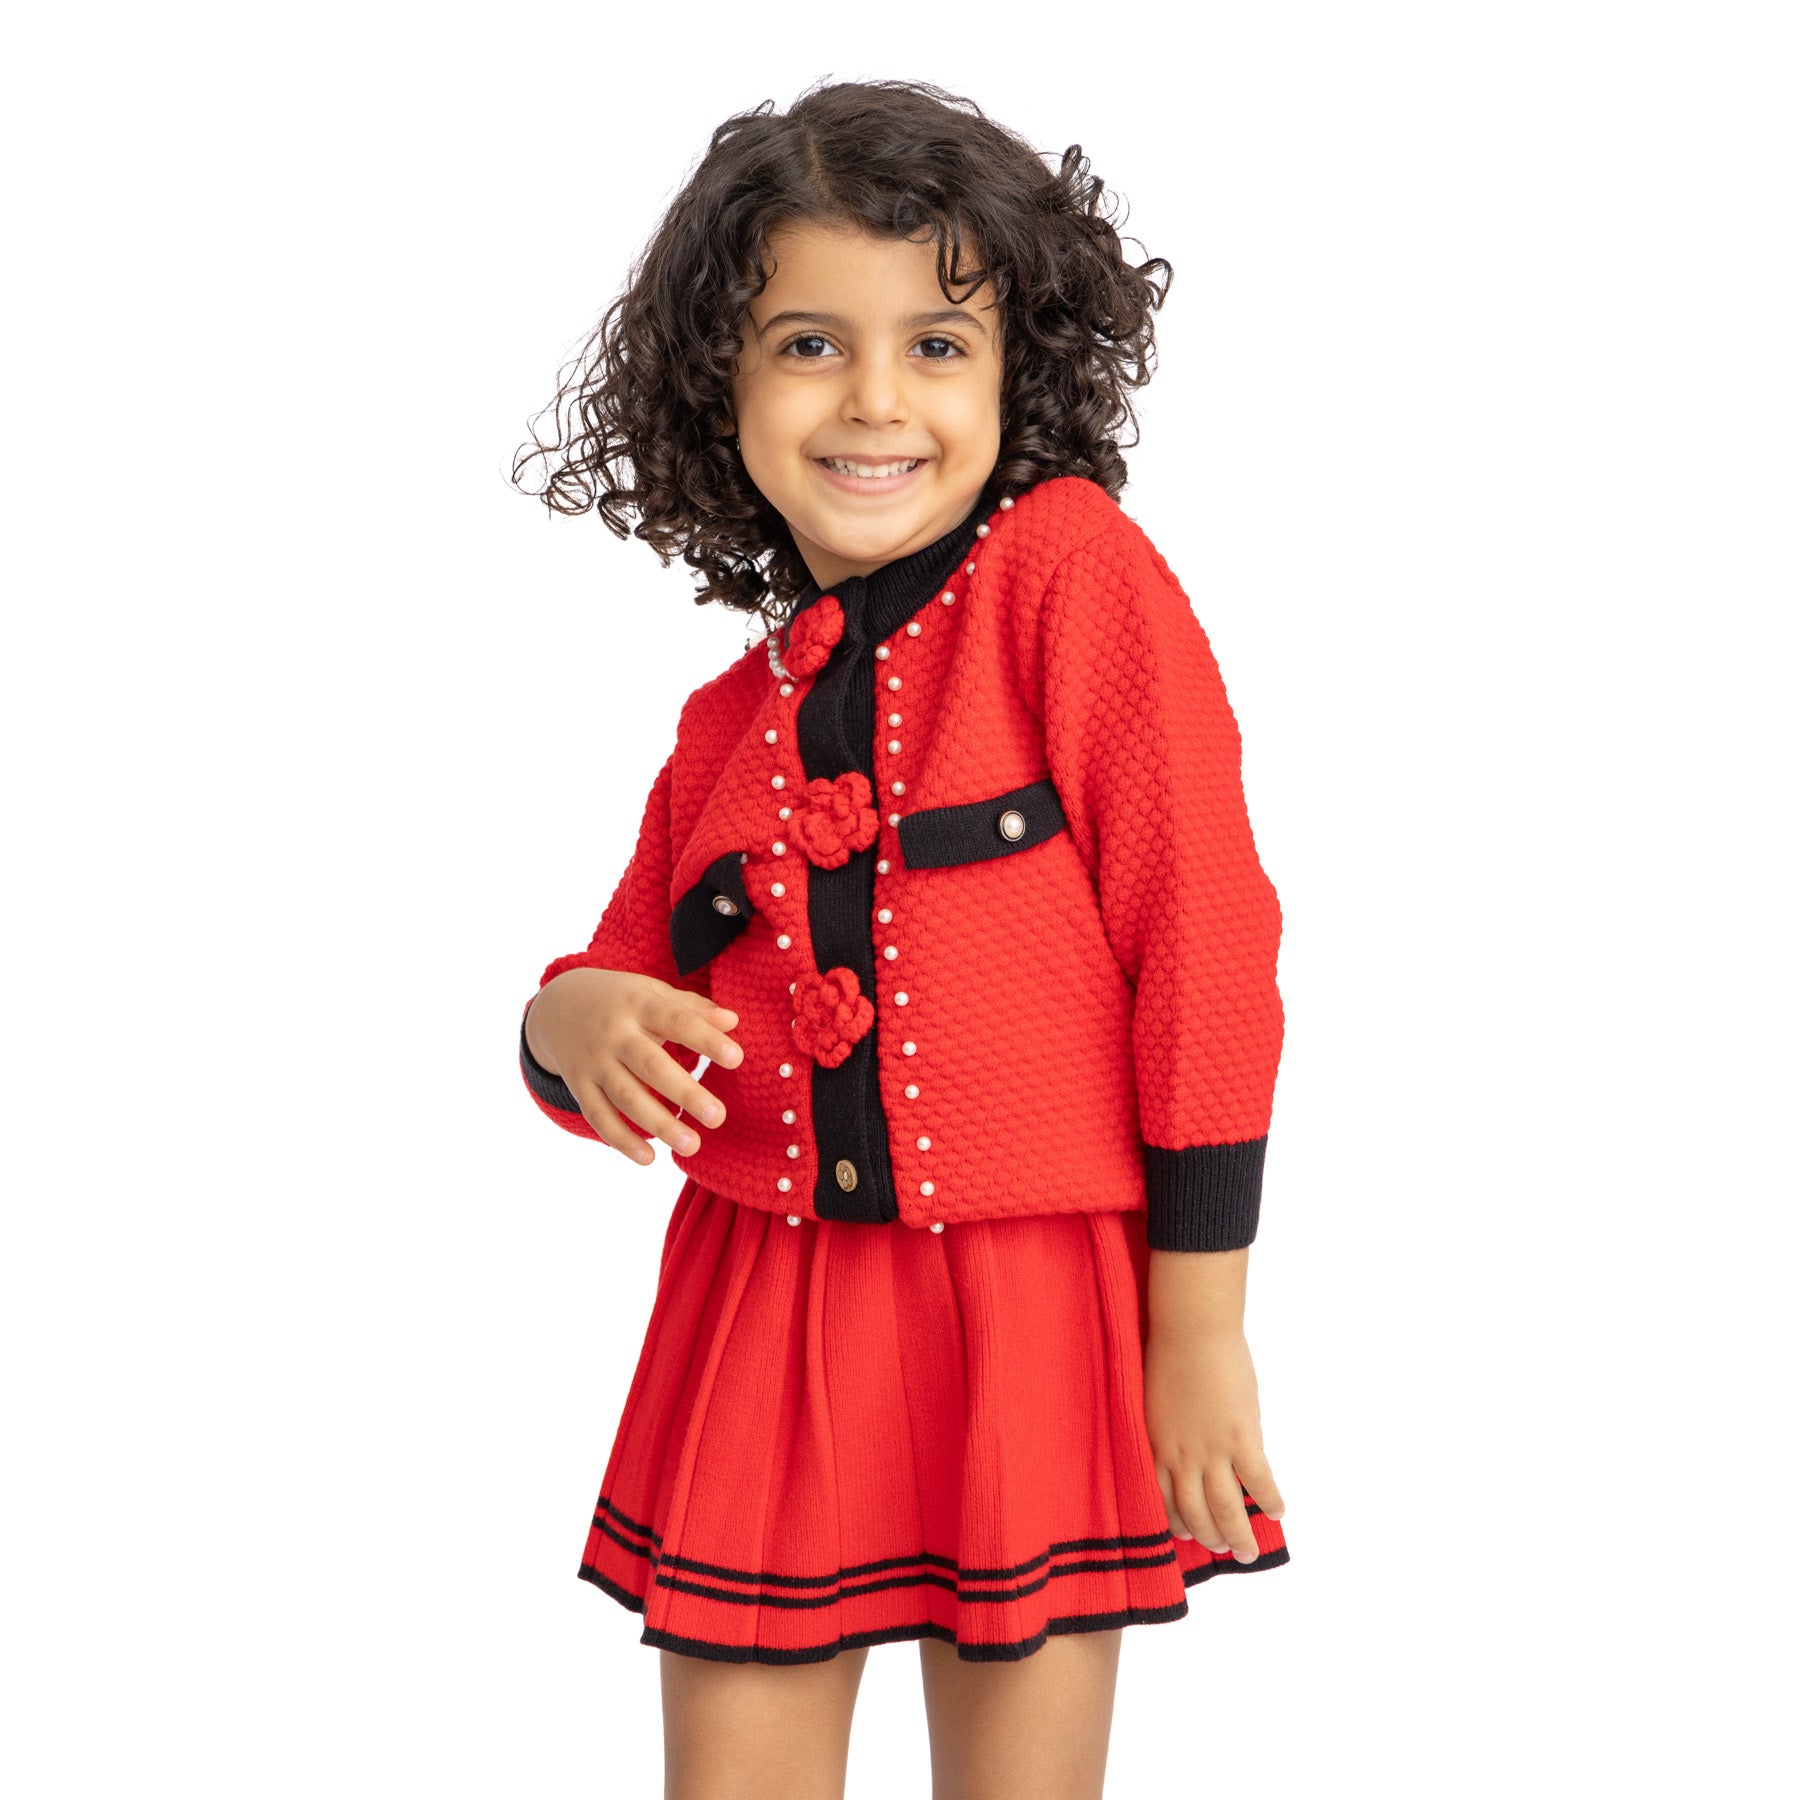 set of red jacket with flower decorations and red skirts